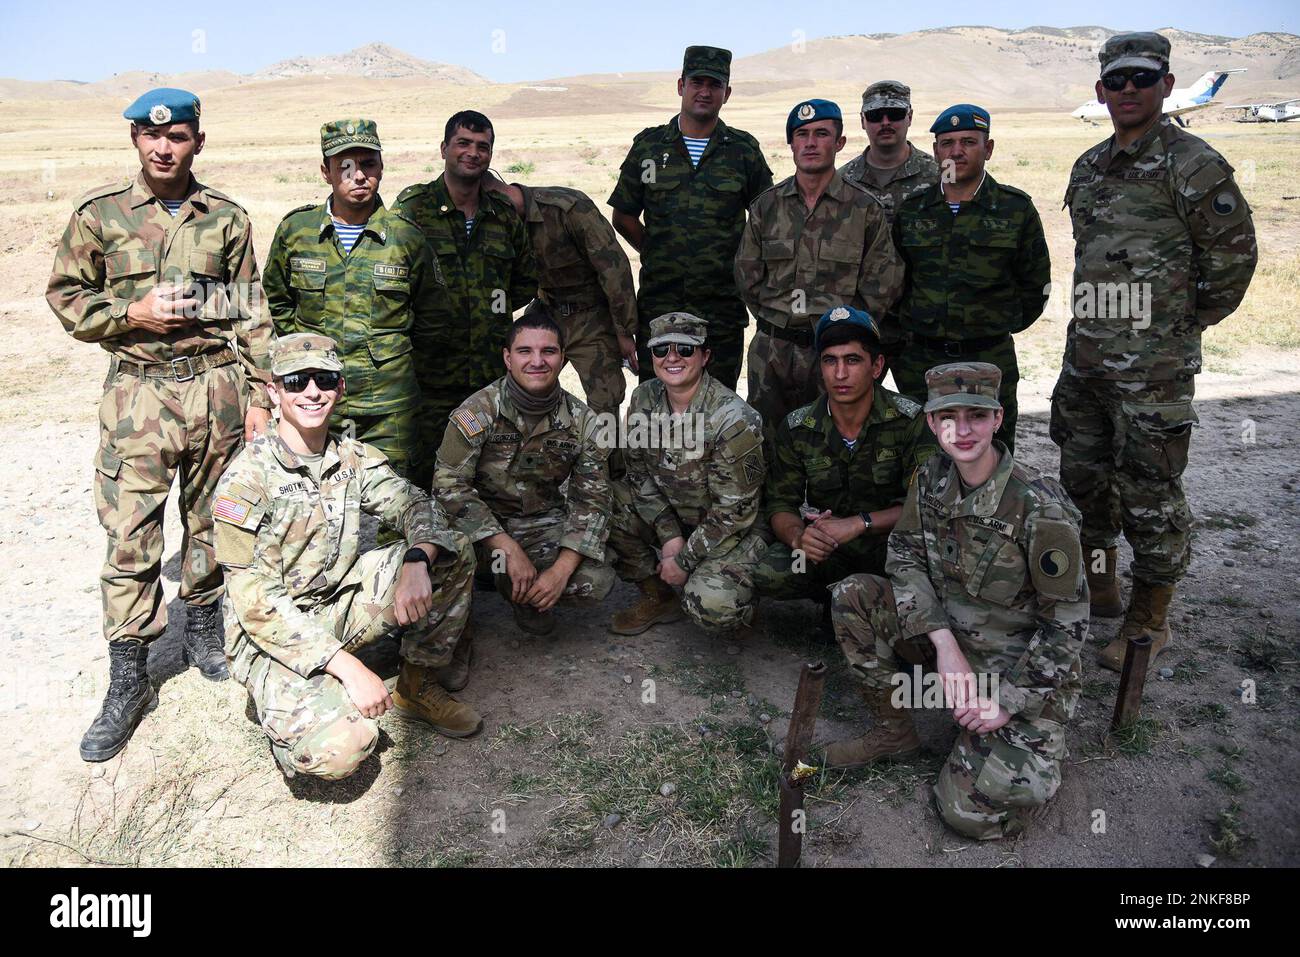 U.S. National Guard Soldiers pose alongside their partners from the Tajikistan Ministry of Defense during the exercise “Regional Cooperation 22” Aug. 14, 2022, at a training site near Dushanbe, Tajikistan. RC 22 is an annual, multi-national U.S. Central Command-sponsored exercise conducted by U.S. forces in partnership with Central and South Asia nations. Stock Photo